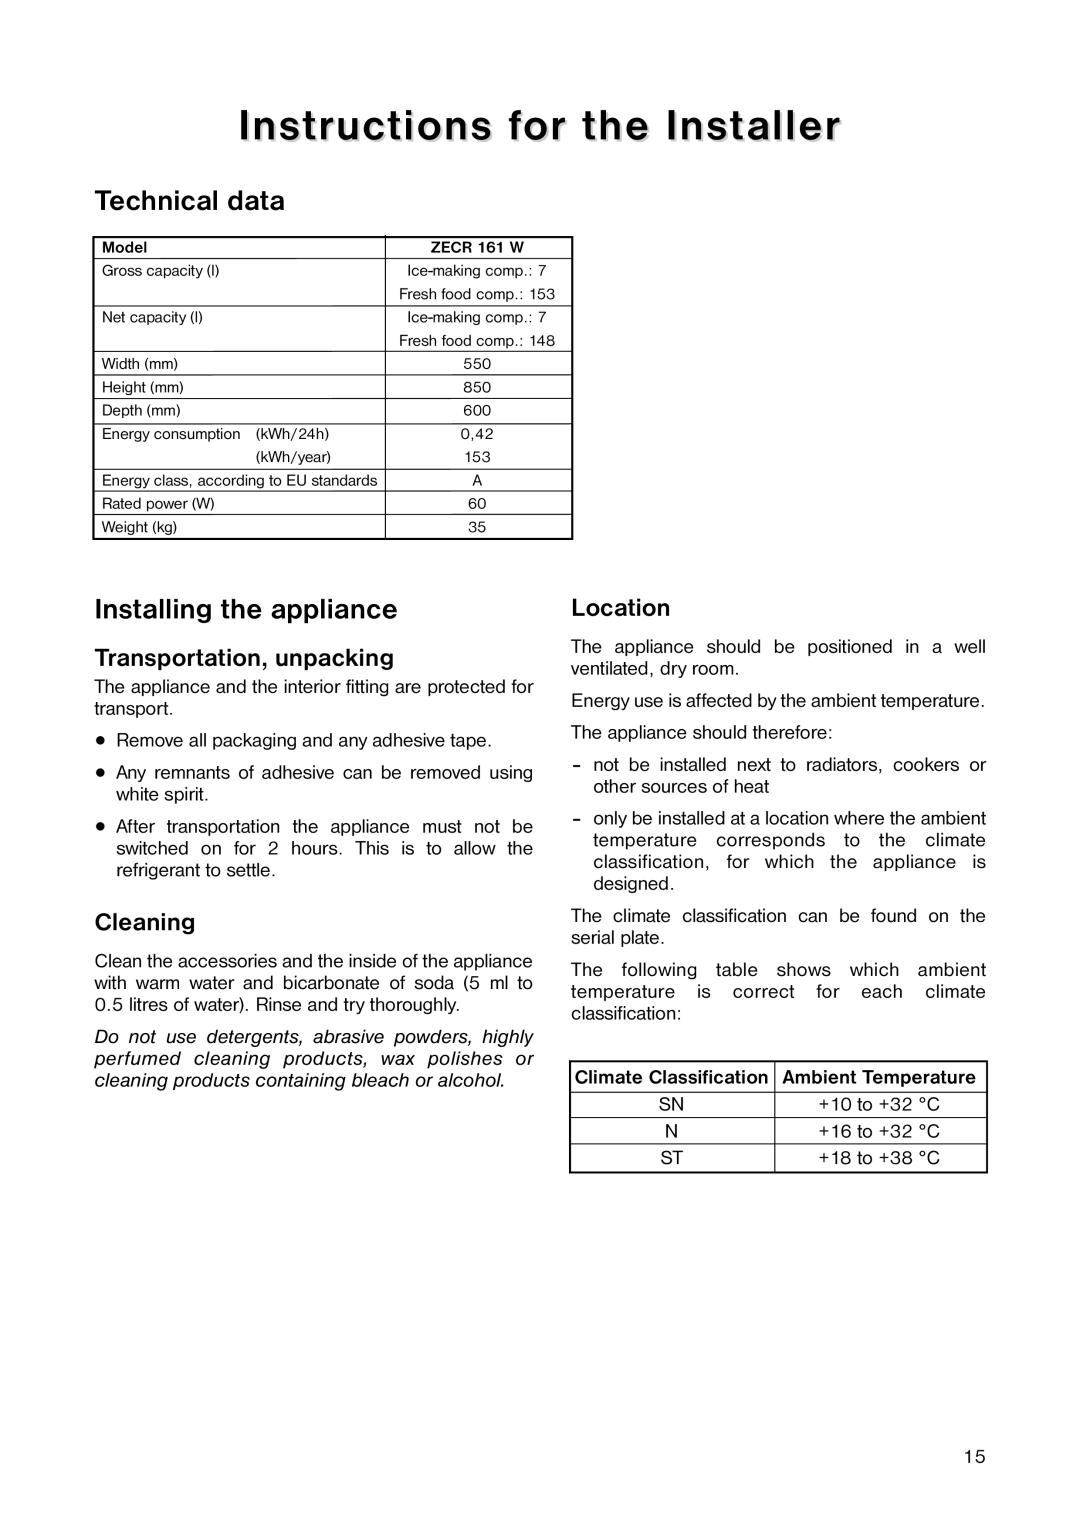 Zanussi ZECR 161 W manual Instructions for the Installer, Location, Climate Classification Ambient Temperature 